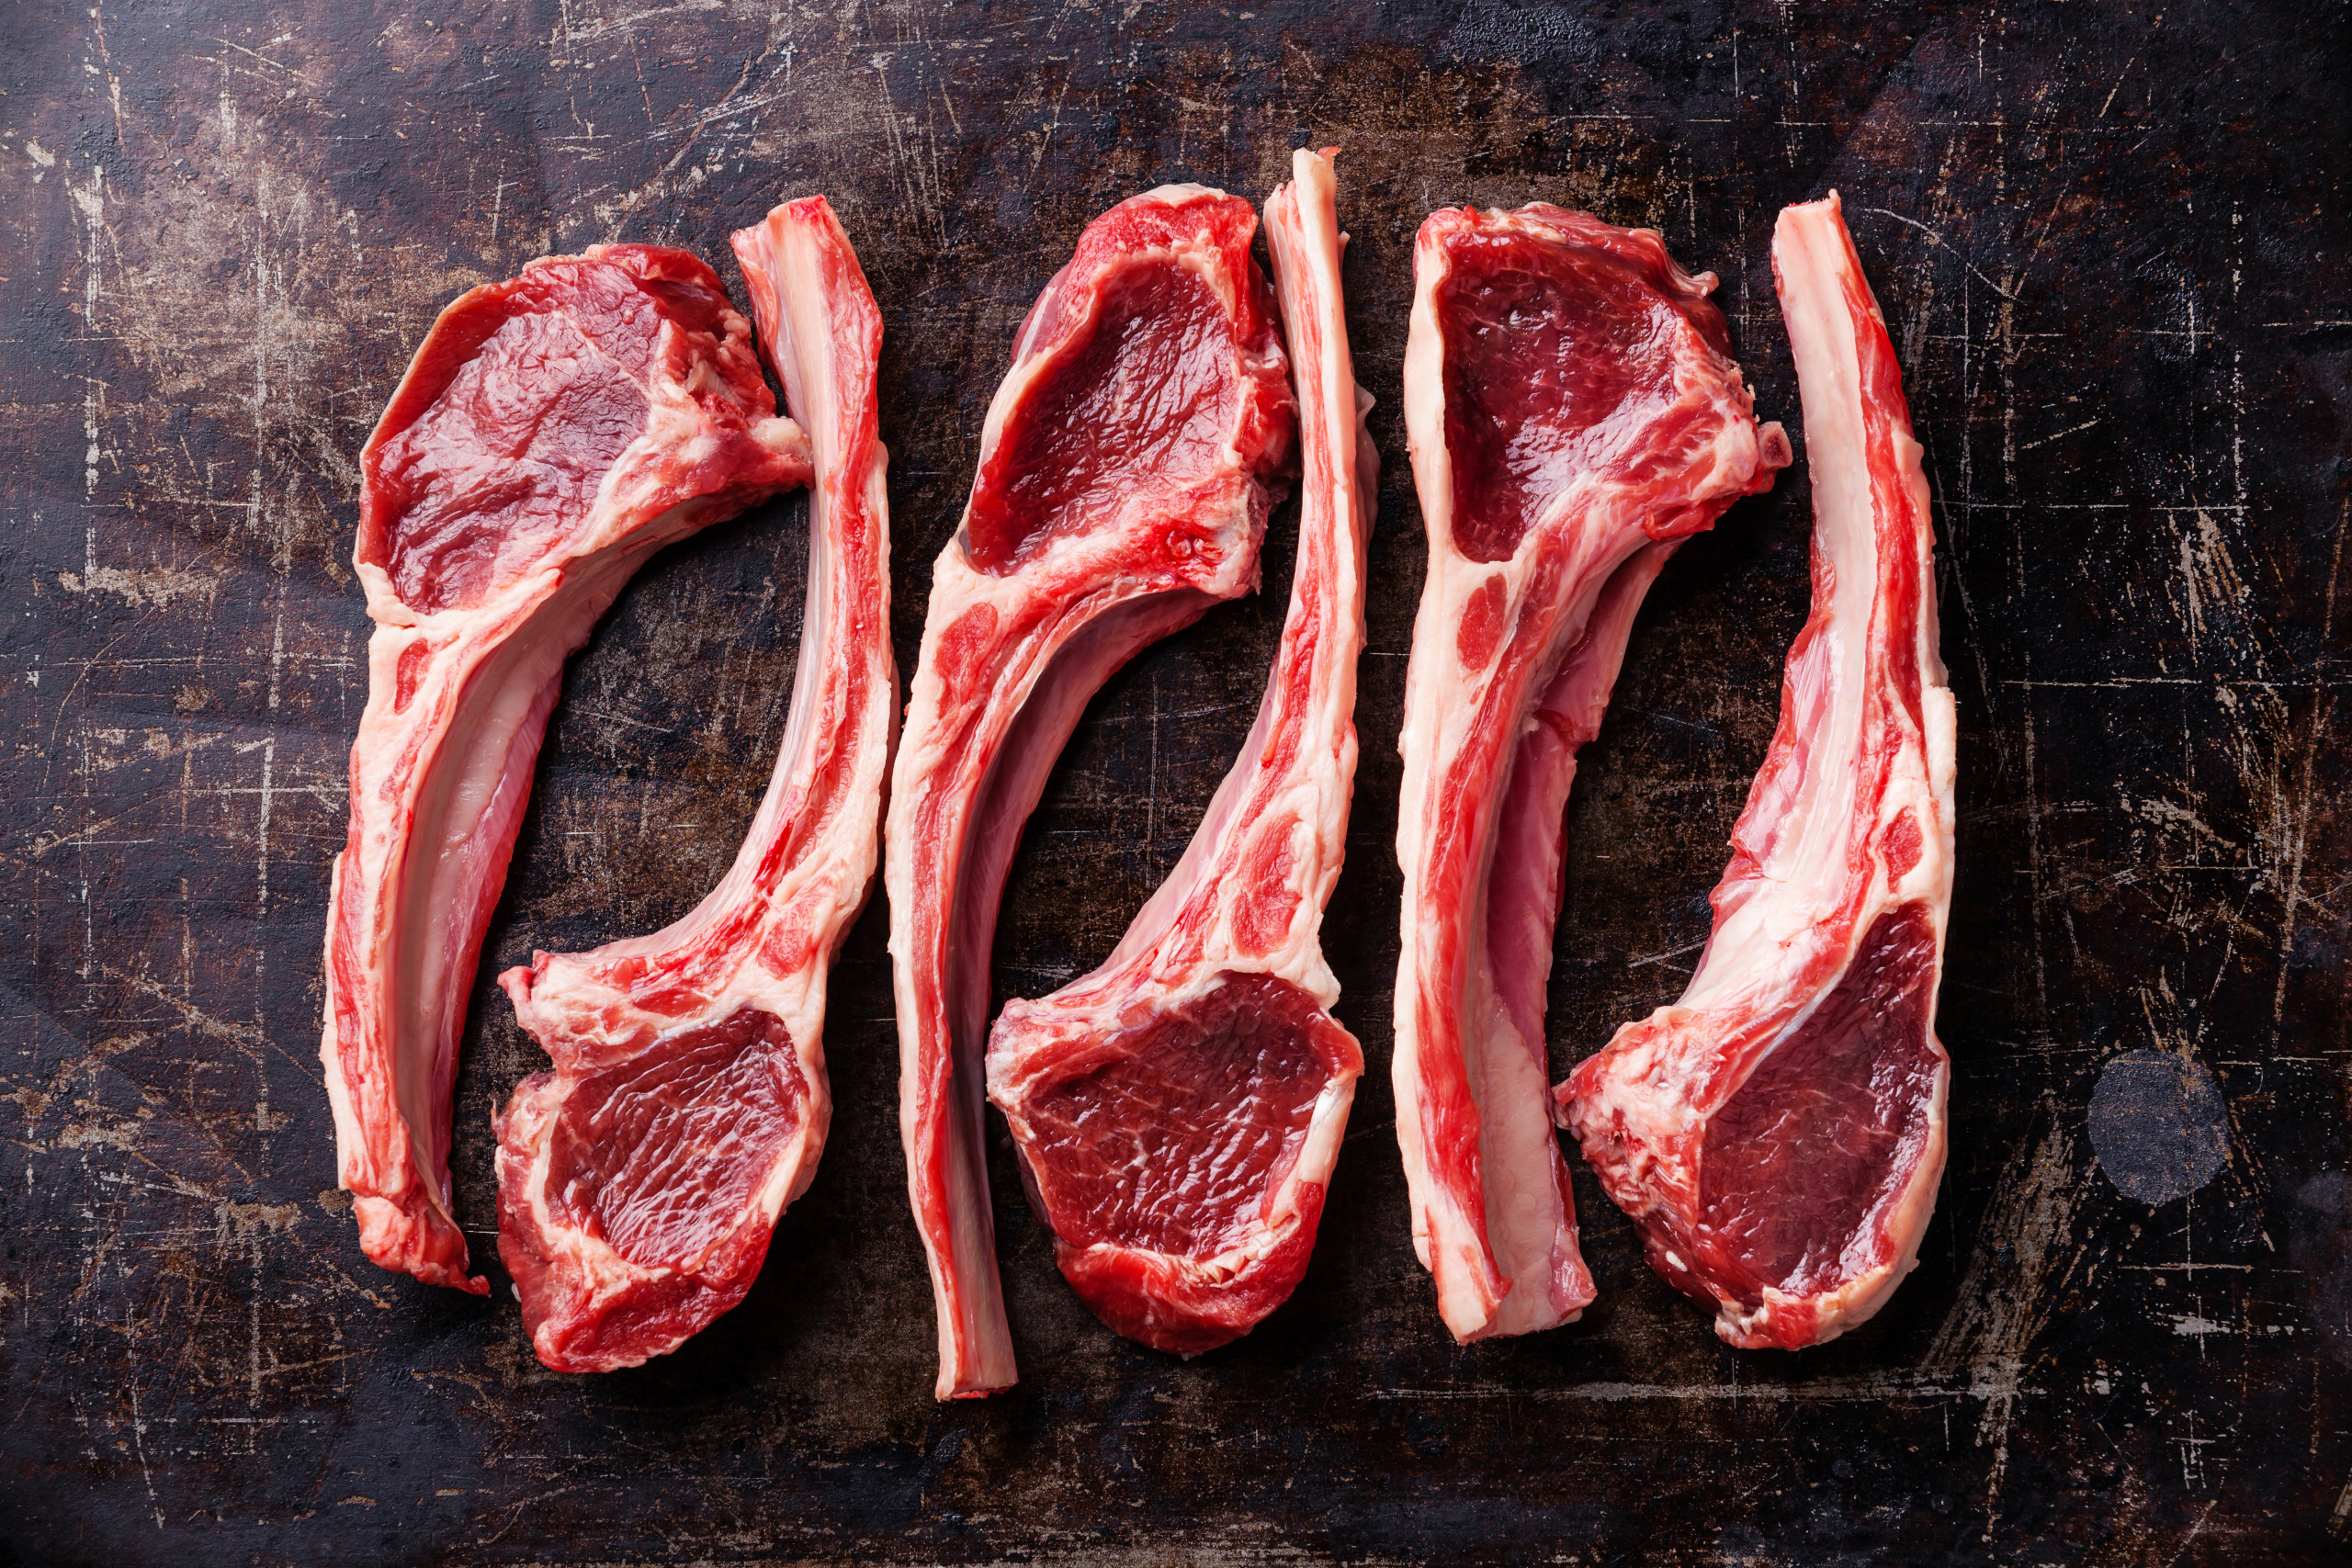 Lamb 101: Nutrition Facts and Health Effects